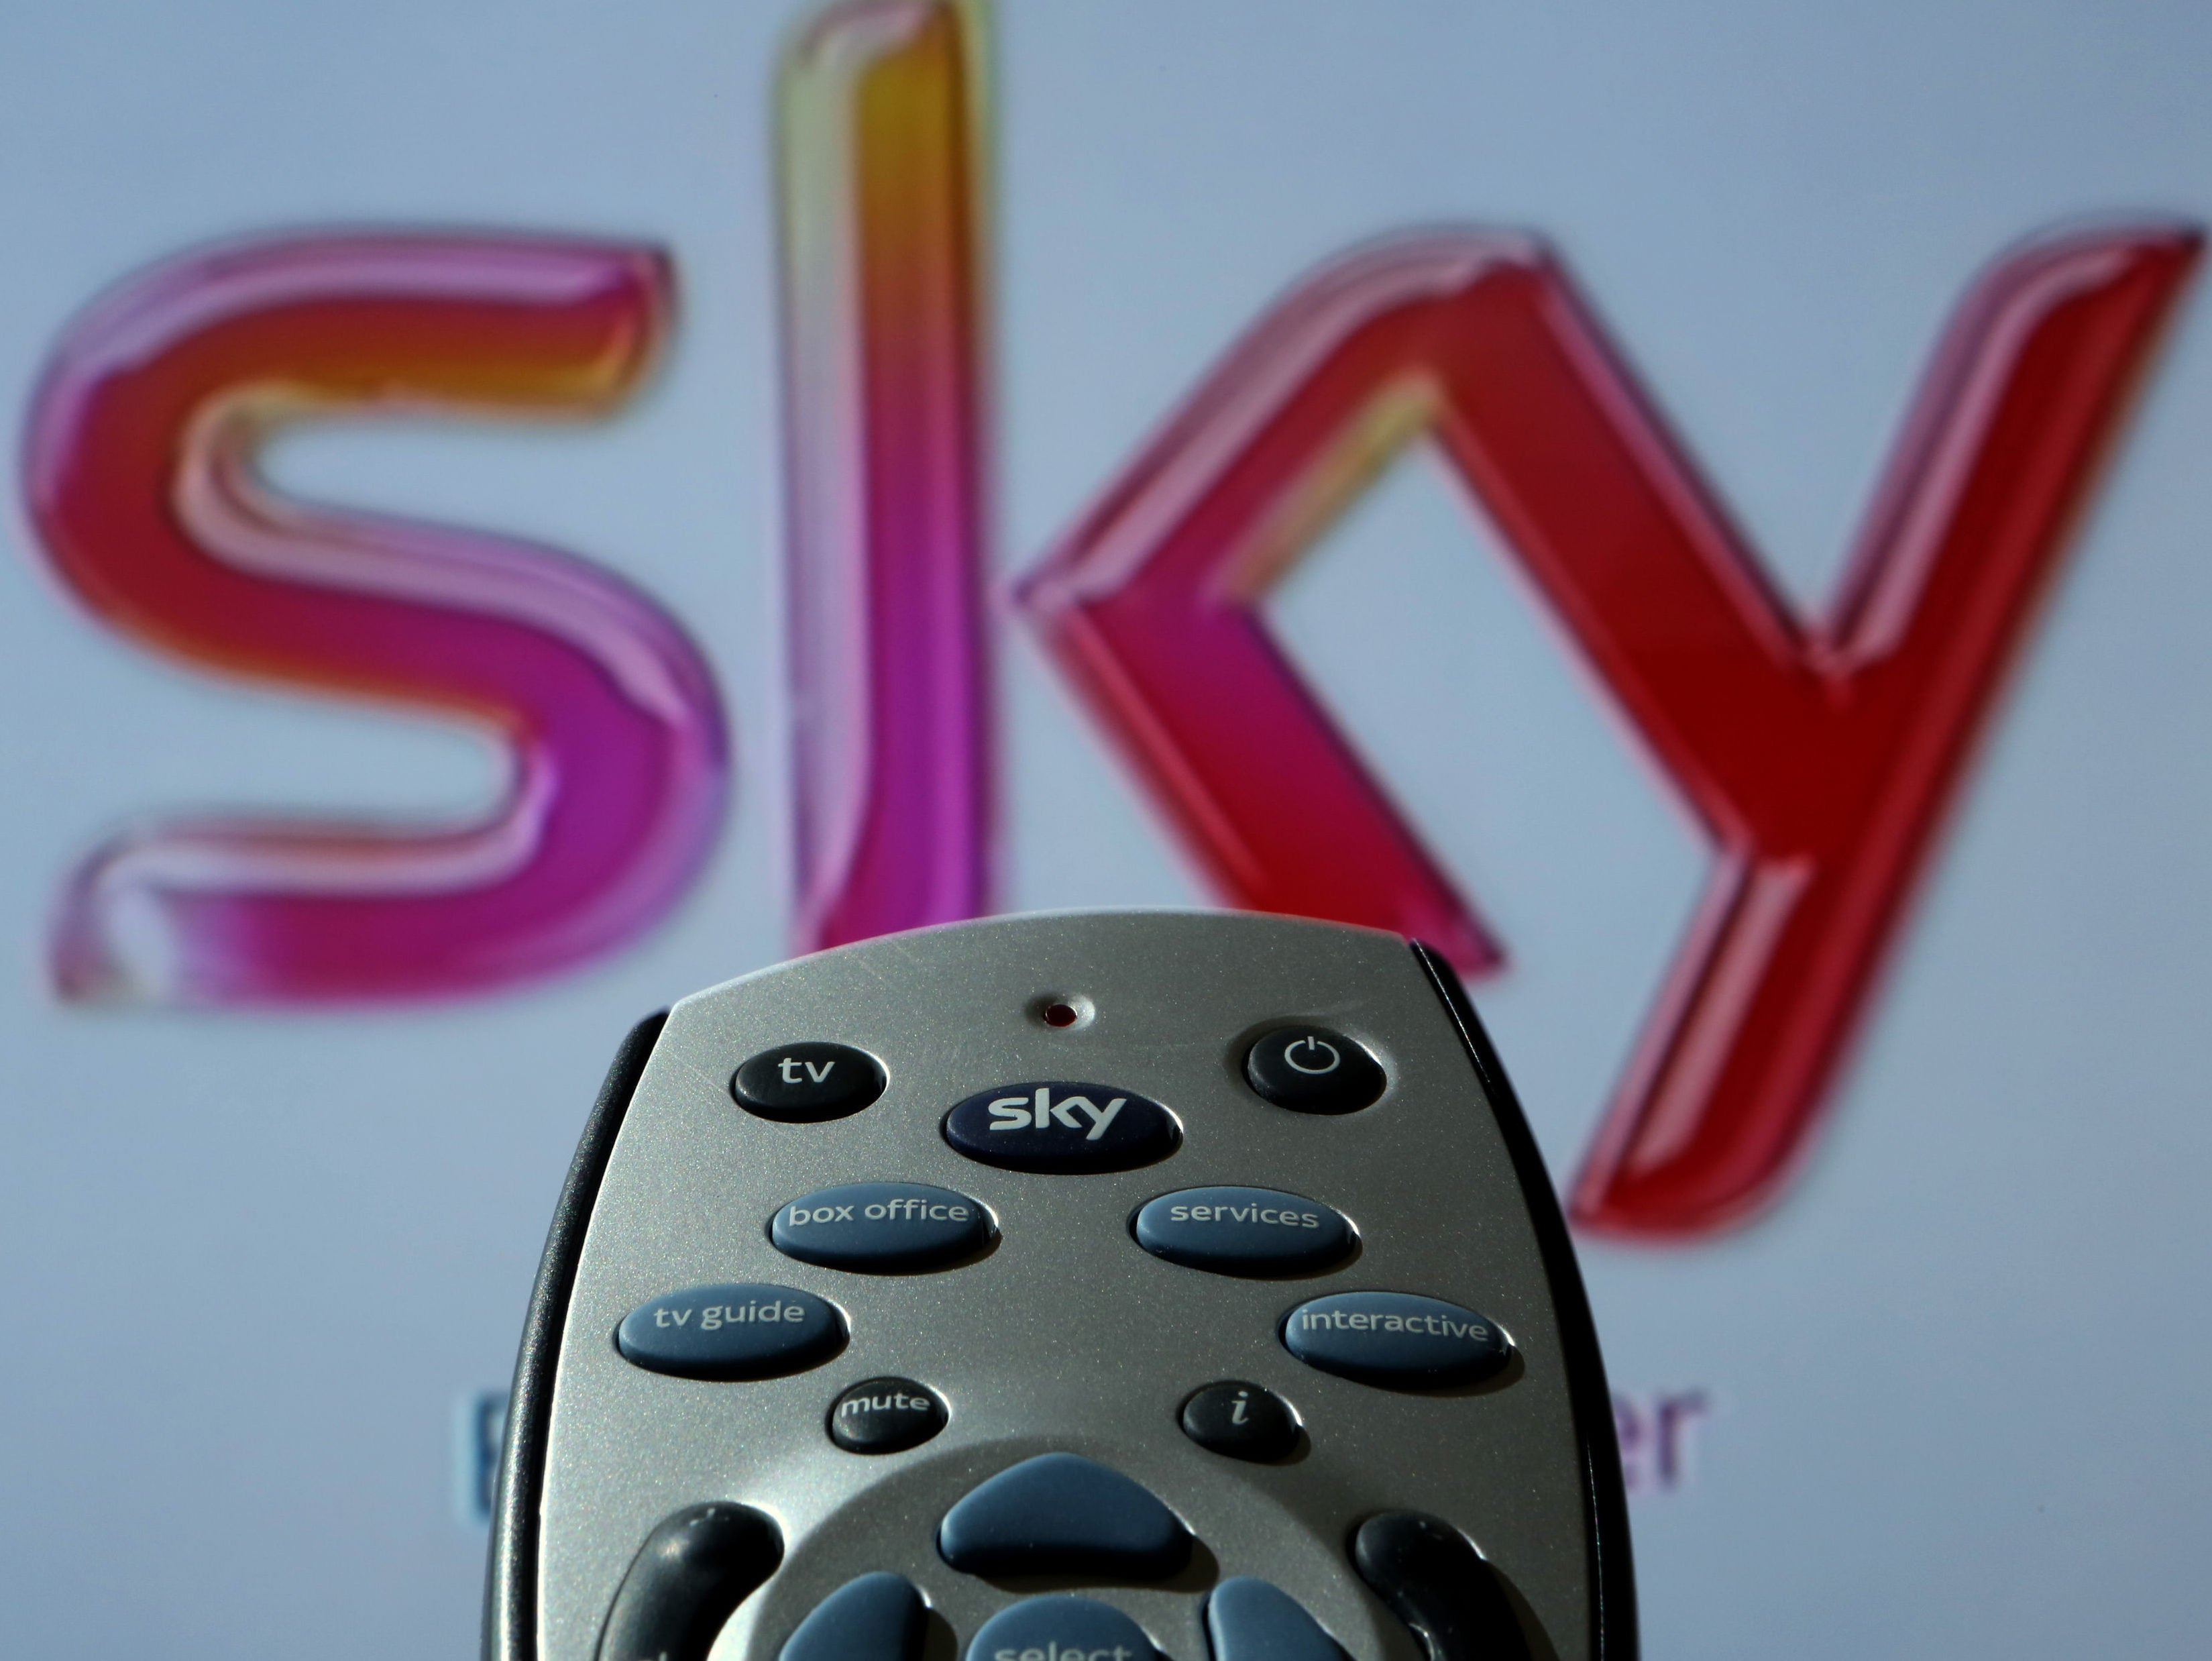 US giant Comcast wins control of Sky after its £30bn bid sees off Rupert Murdoch's Fox at weekend auction